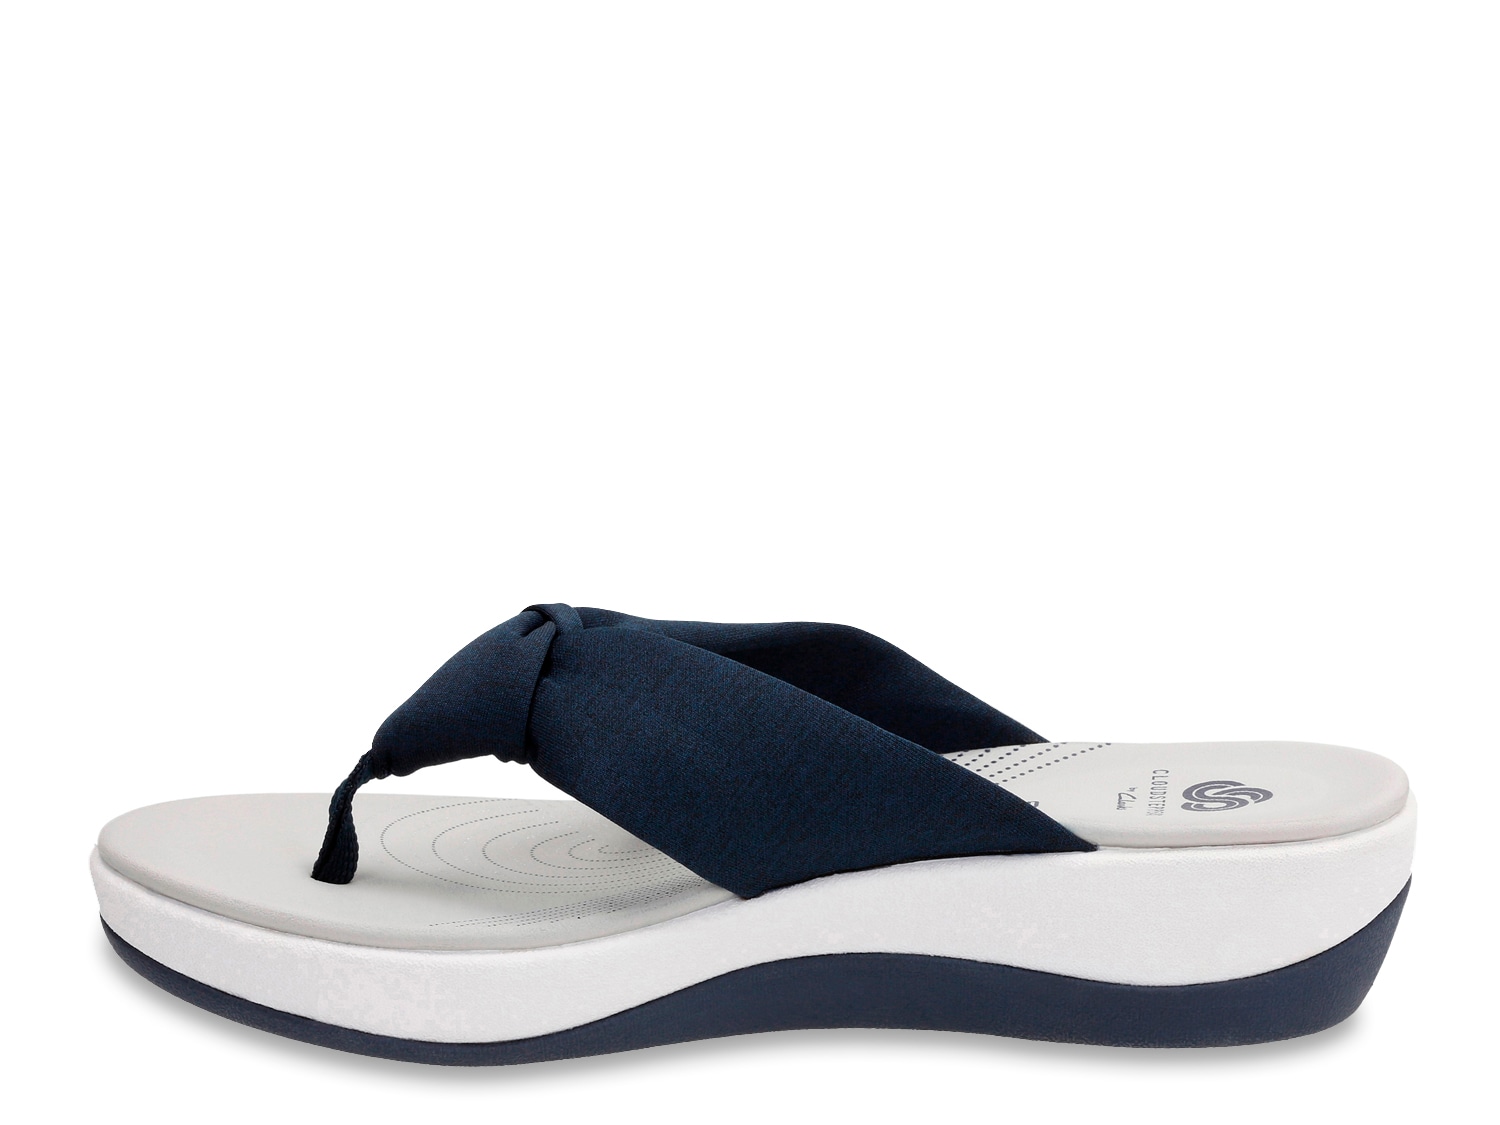 Cloudsteppers by Clarks Arla Glison Wedge Sandal | DSW